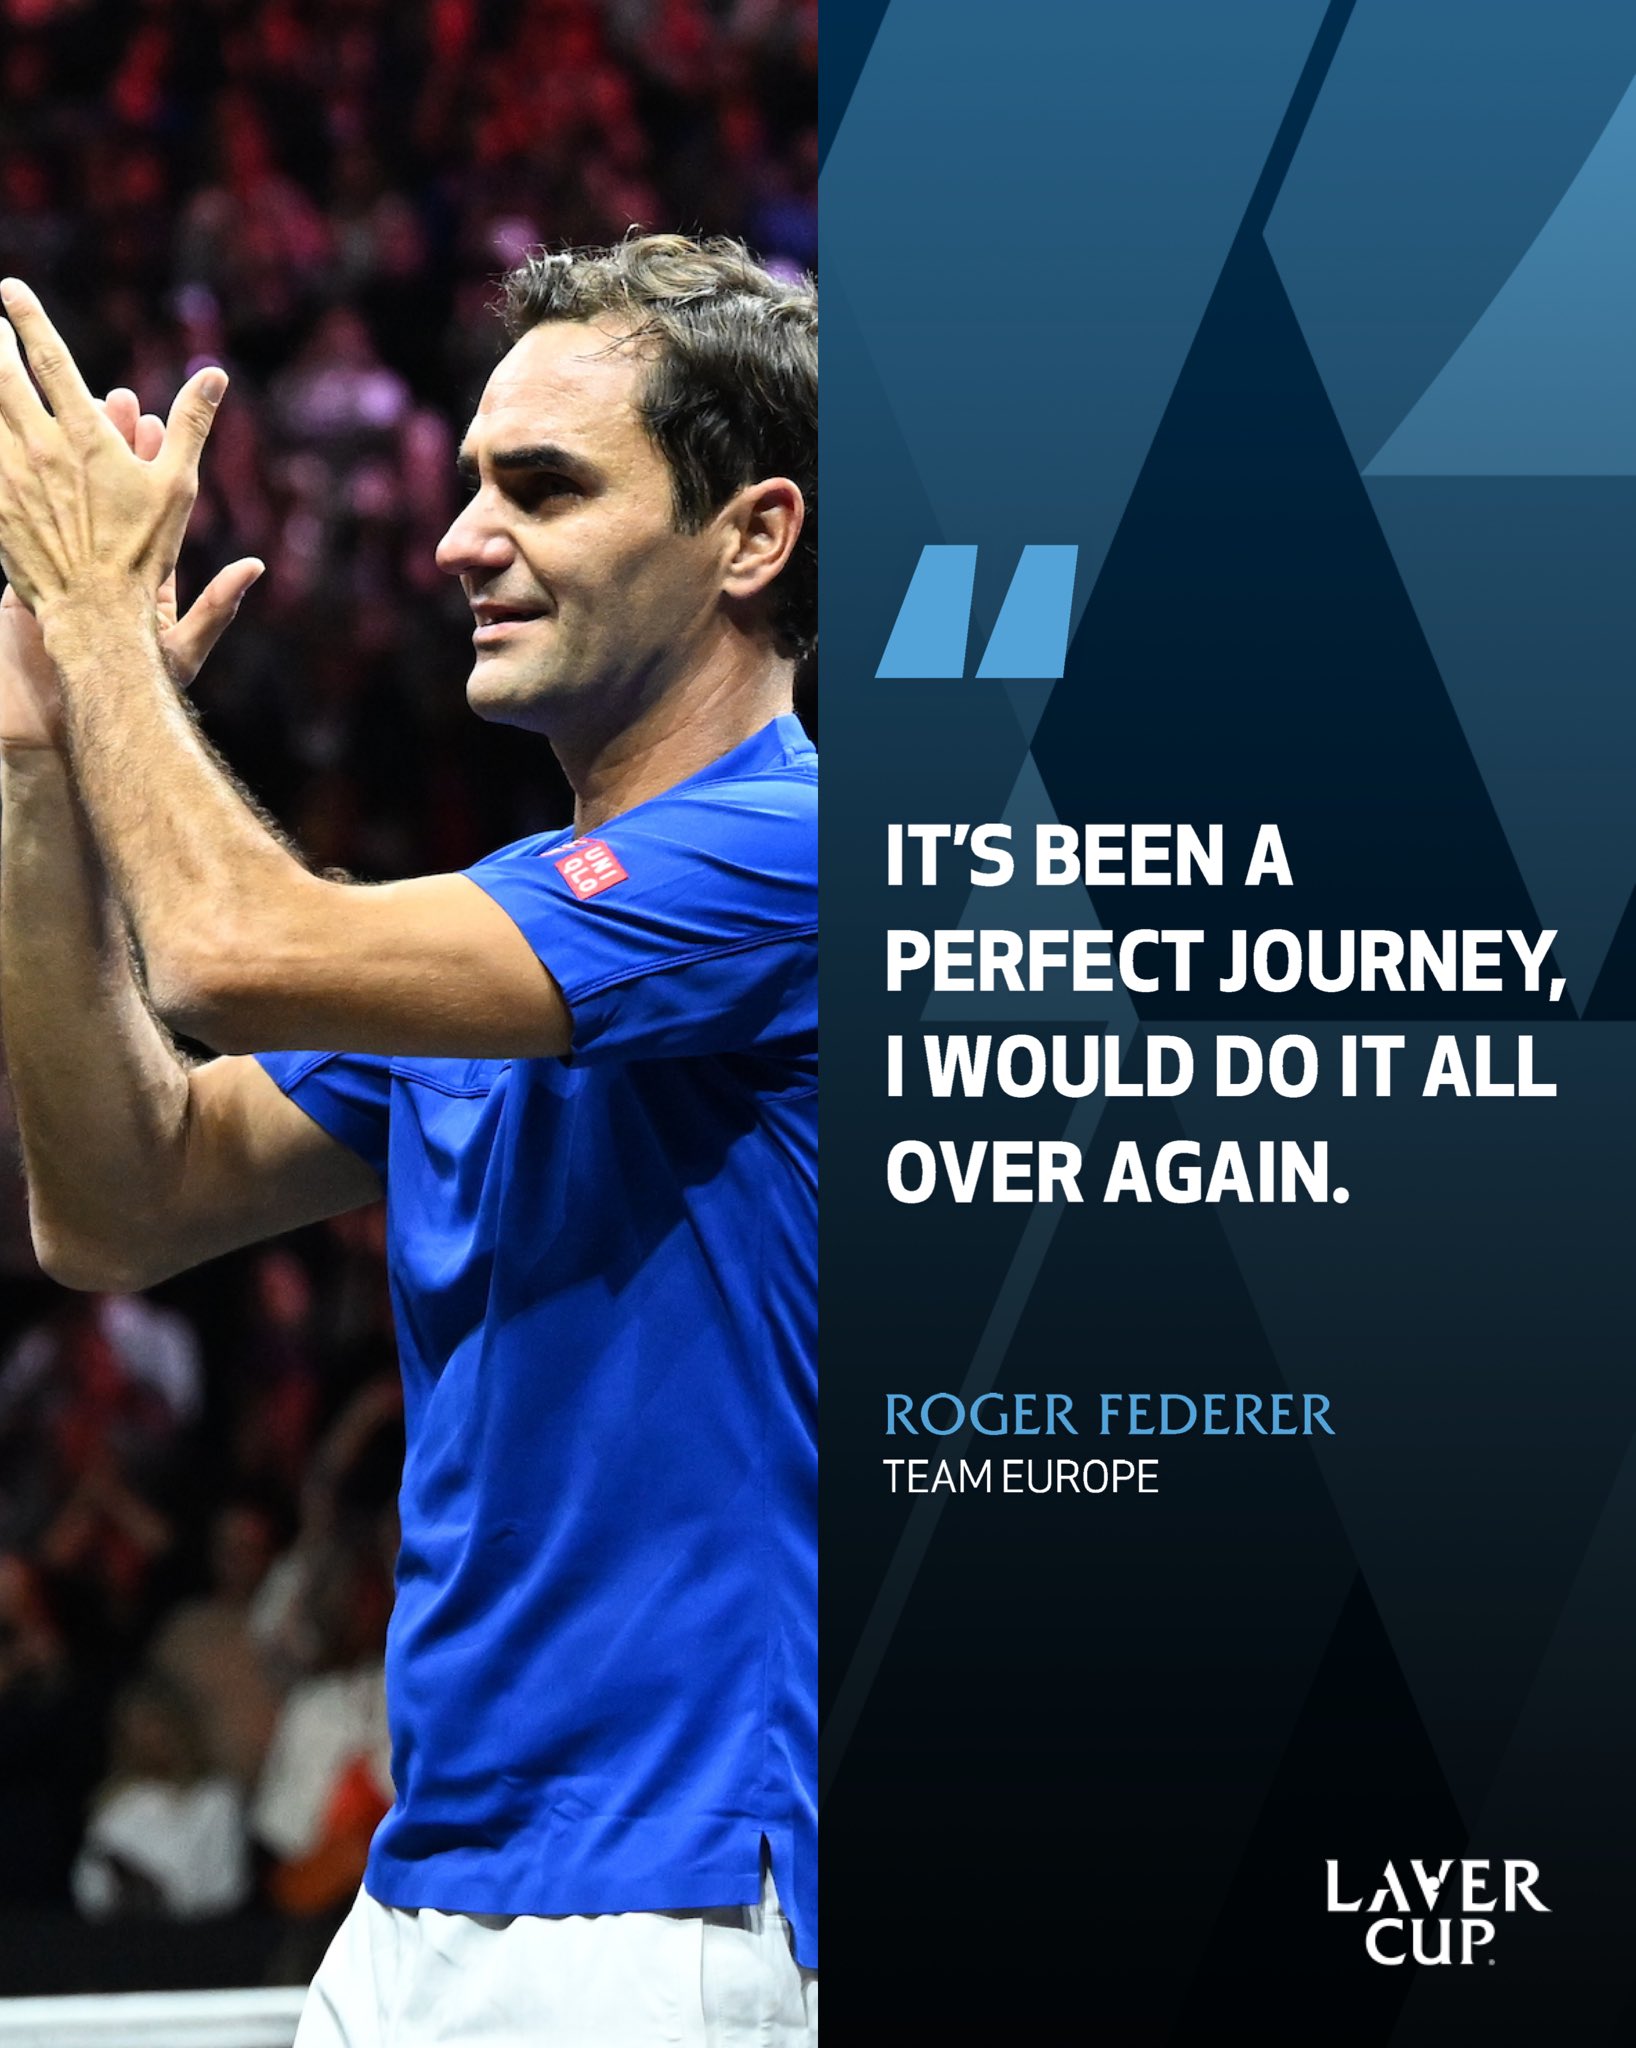 Laver Cup 2022 - Day 1: Roger's Last Match (Sep 23)  - Page 4 Fdak6CQWAAE9dUM?format=jpg&name=large